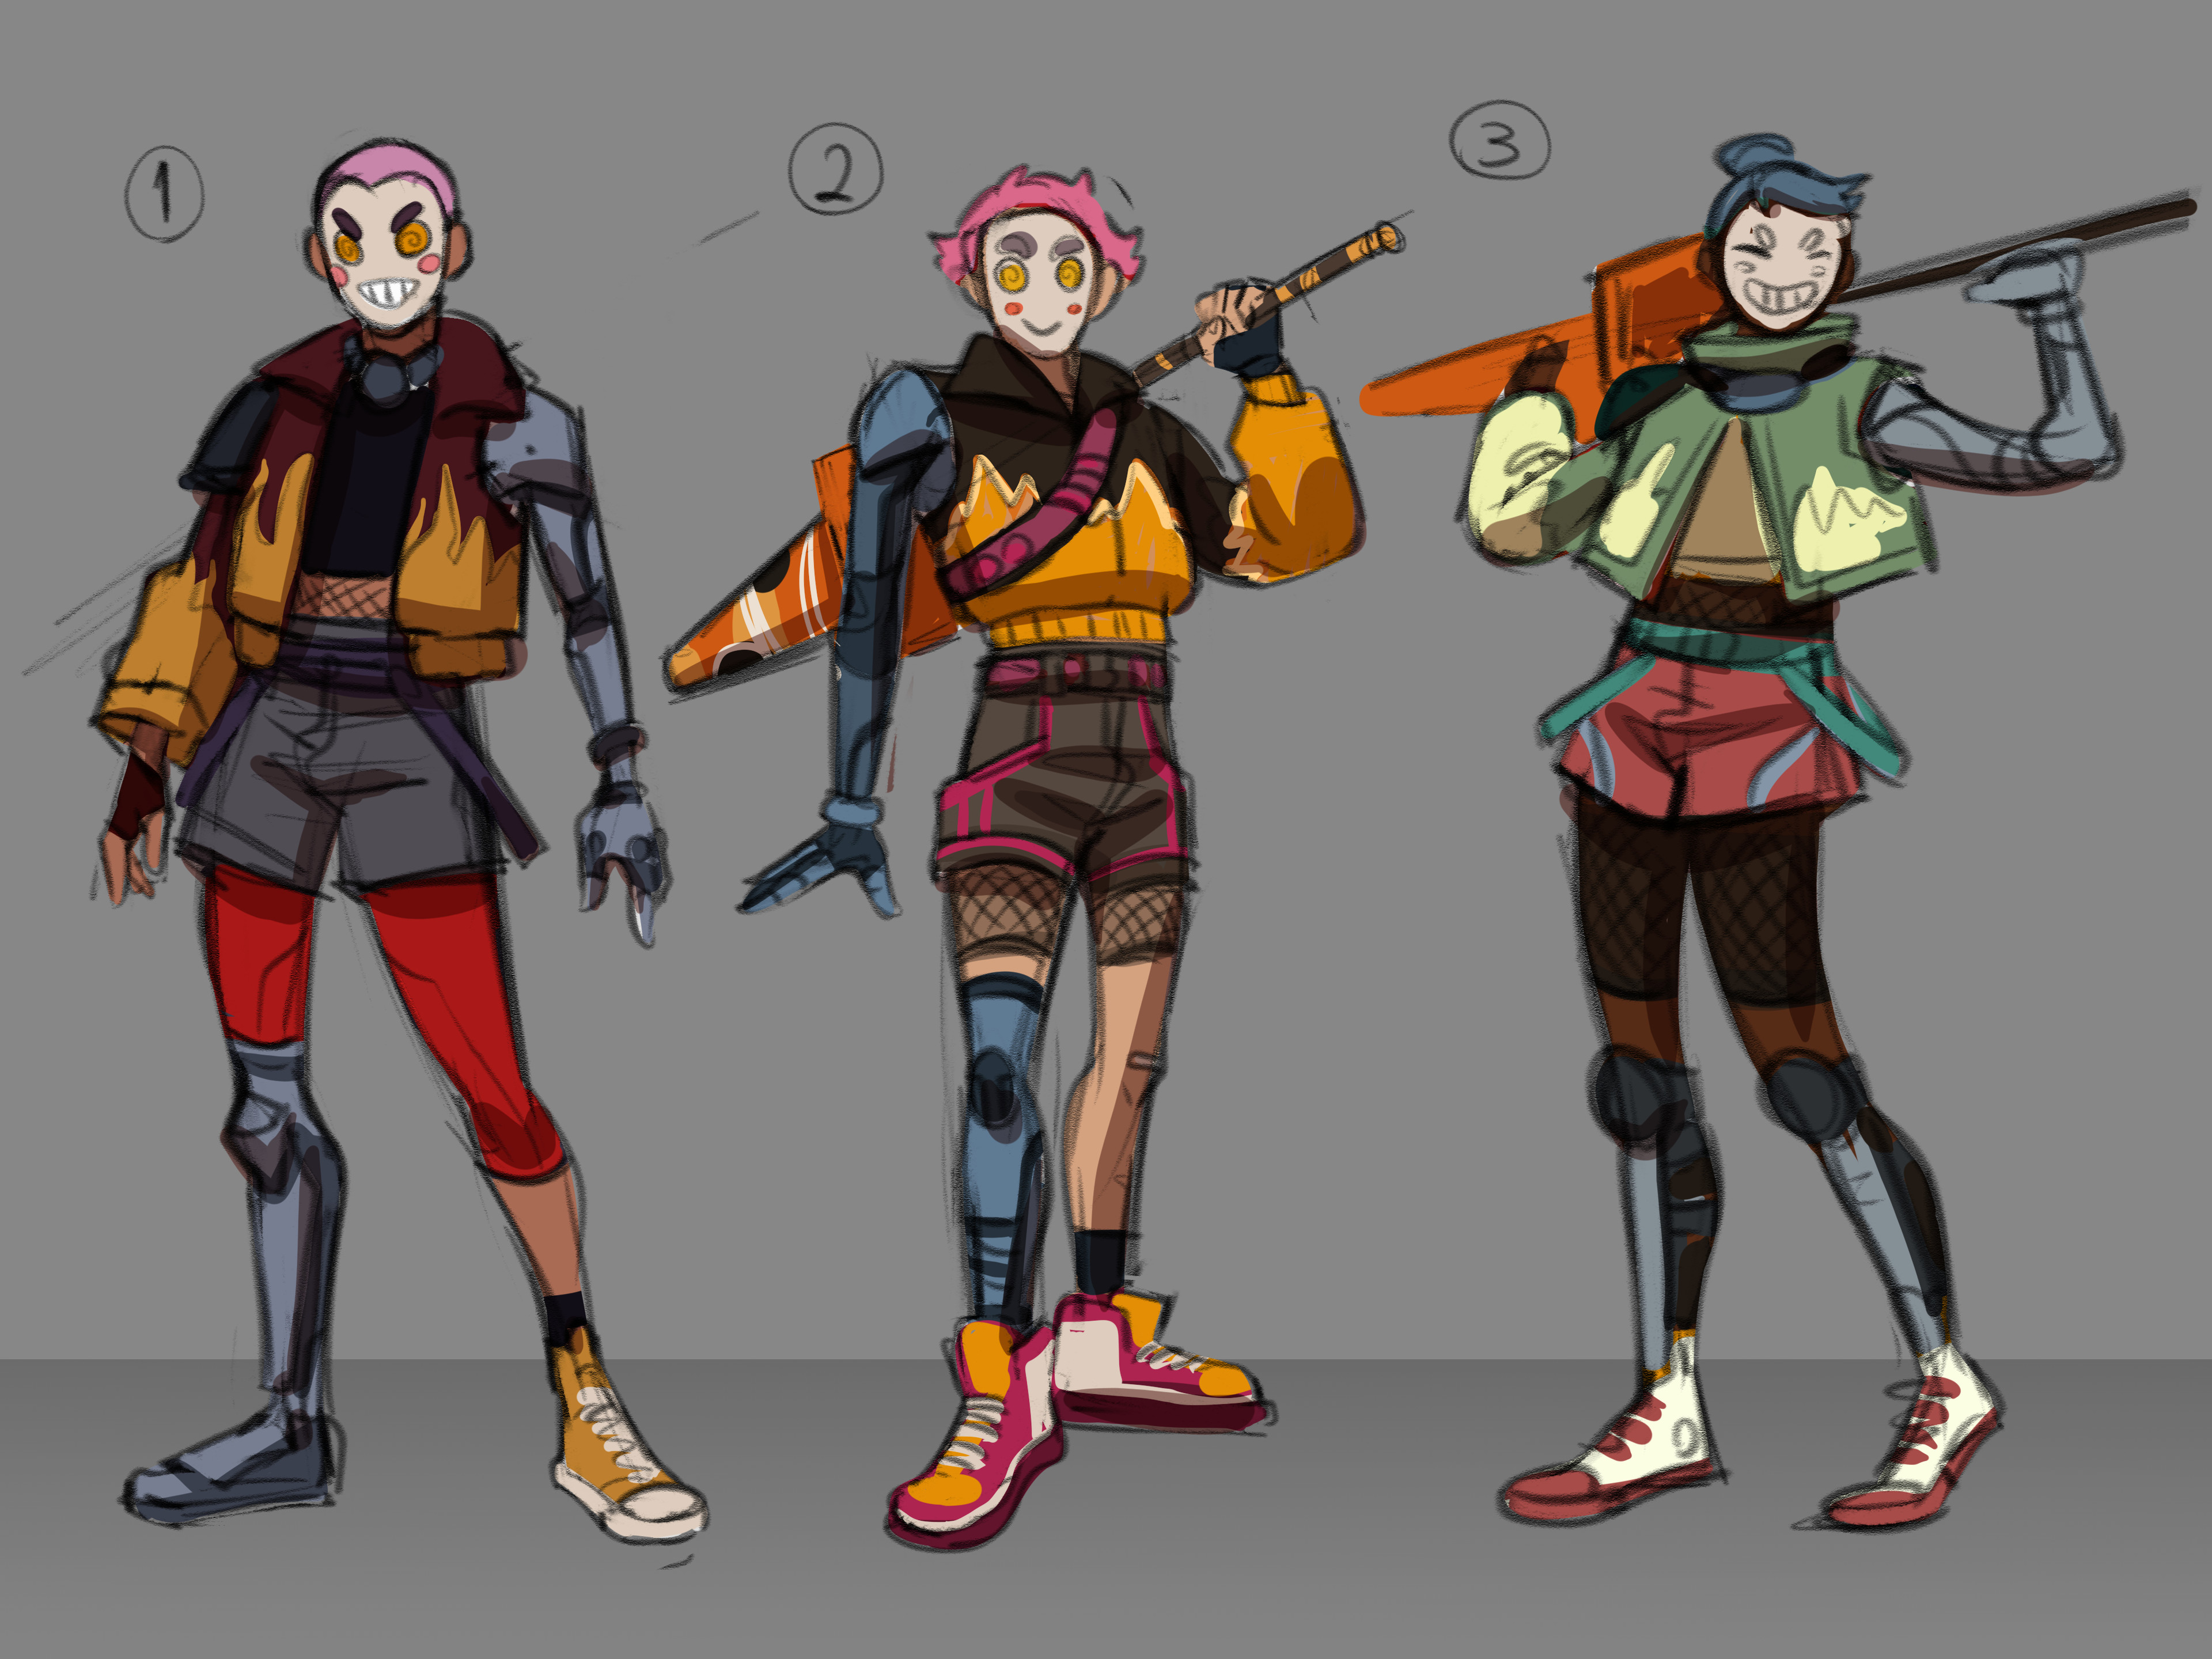 Some character iterations and color exploration for a few of the designs I liked the most.